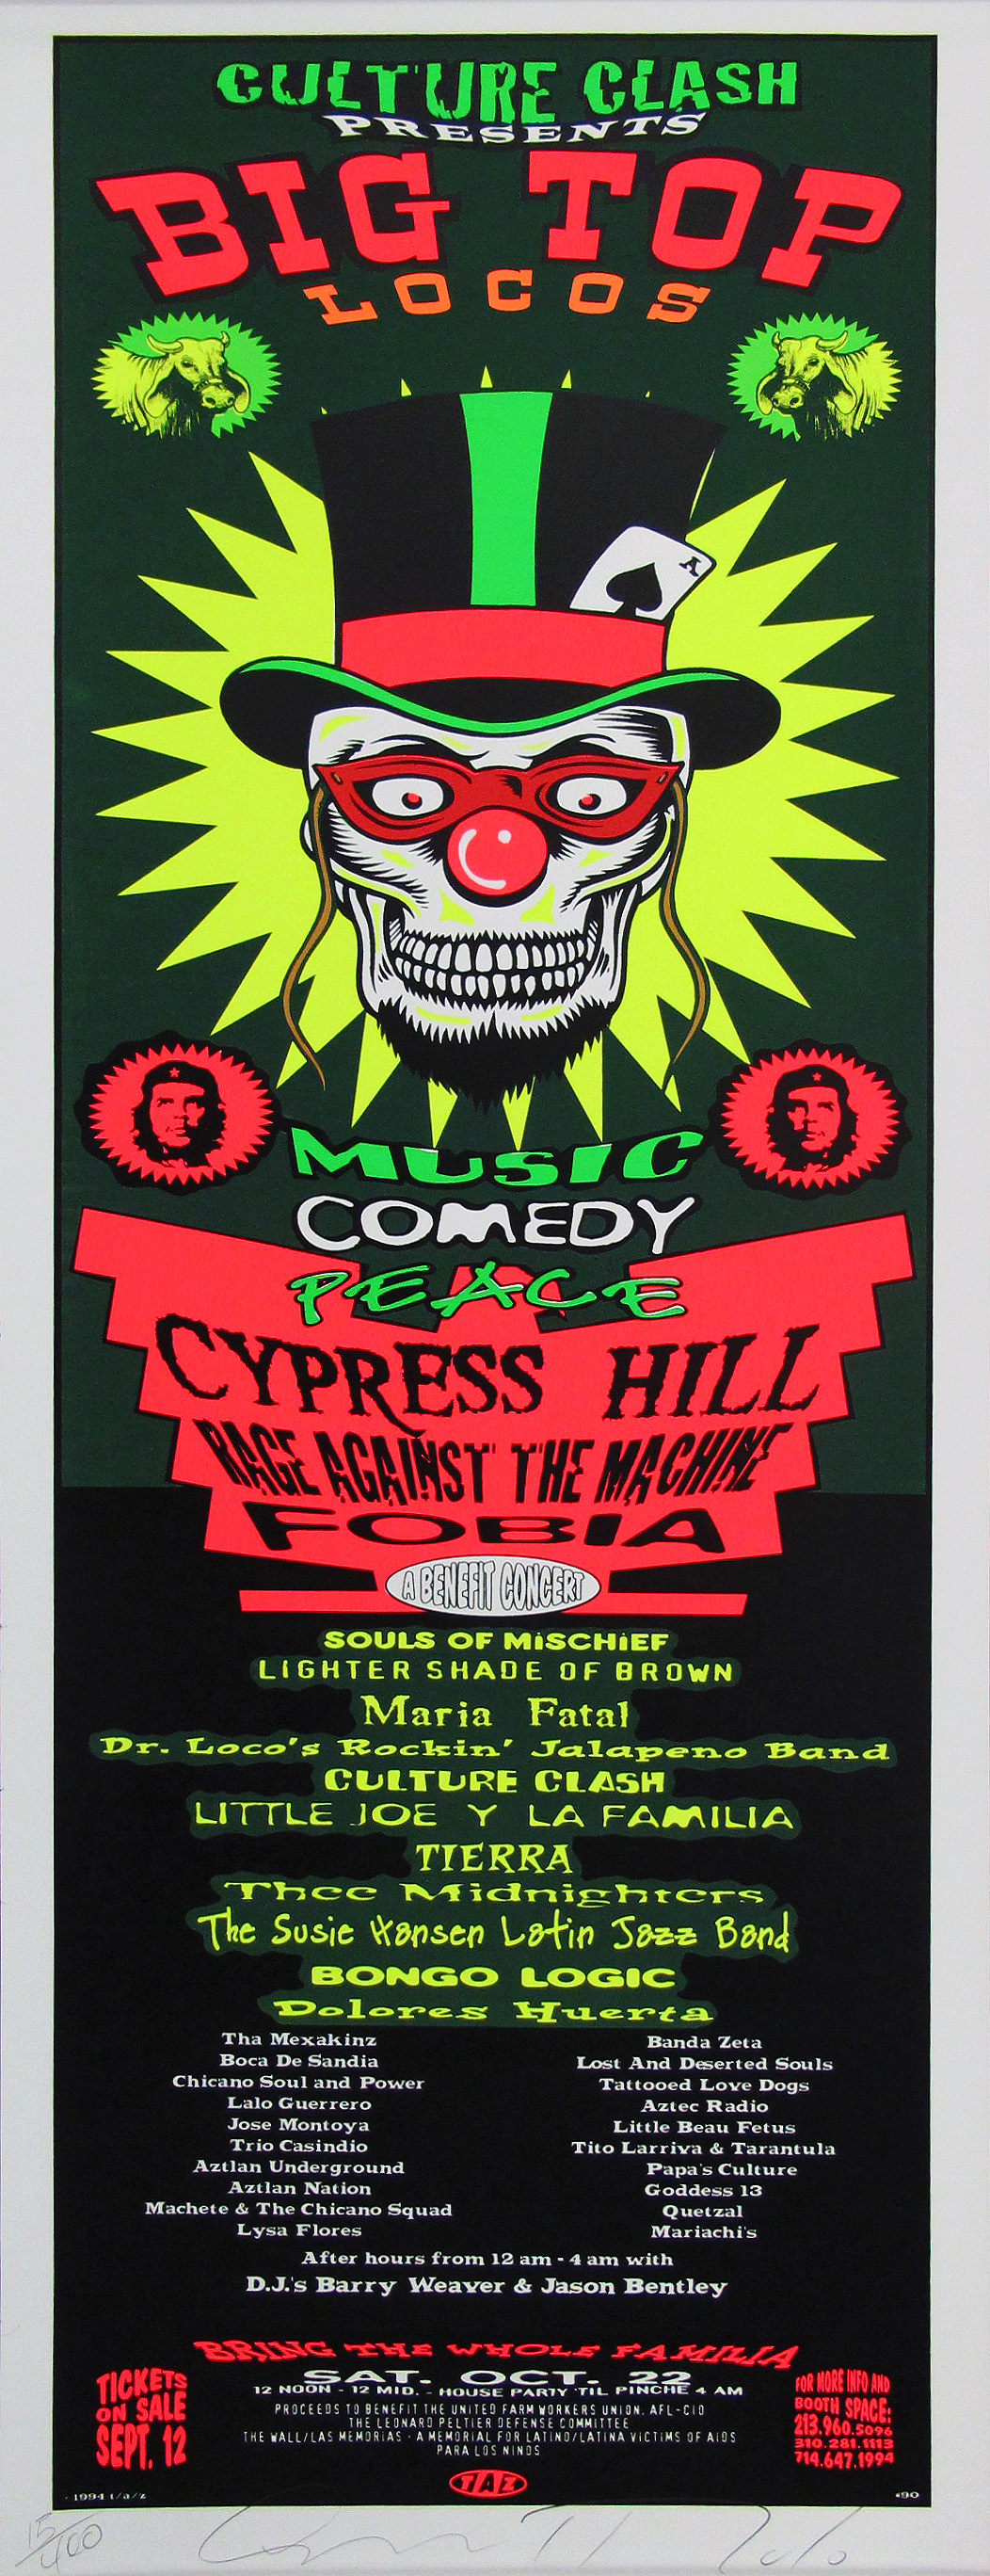 Big Top Locos With Cypress Hill & Rage Against The Machine Concert Poster